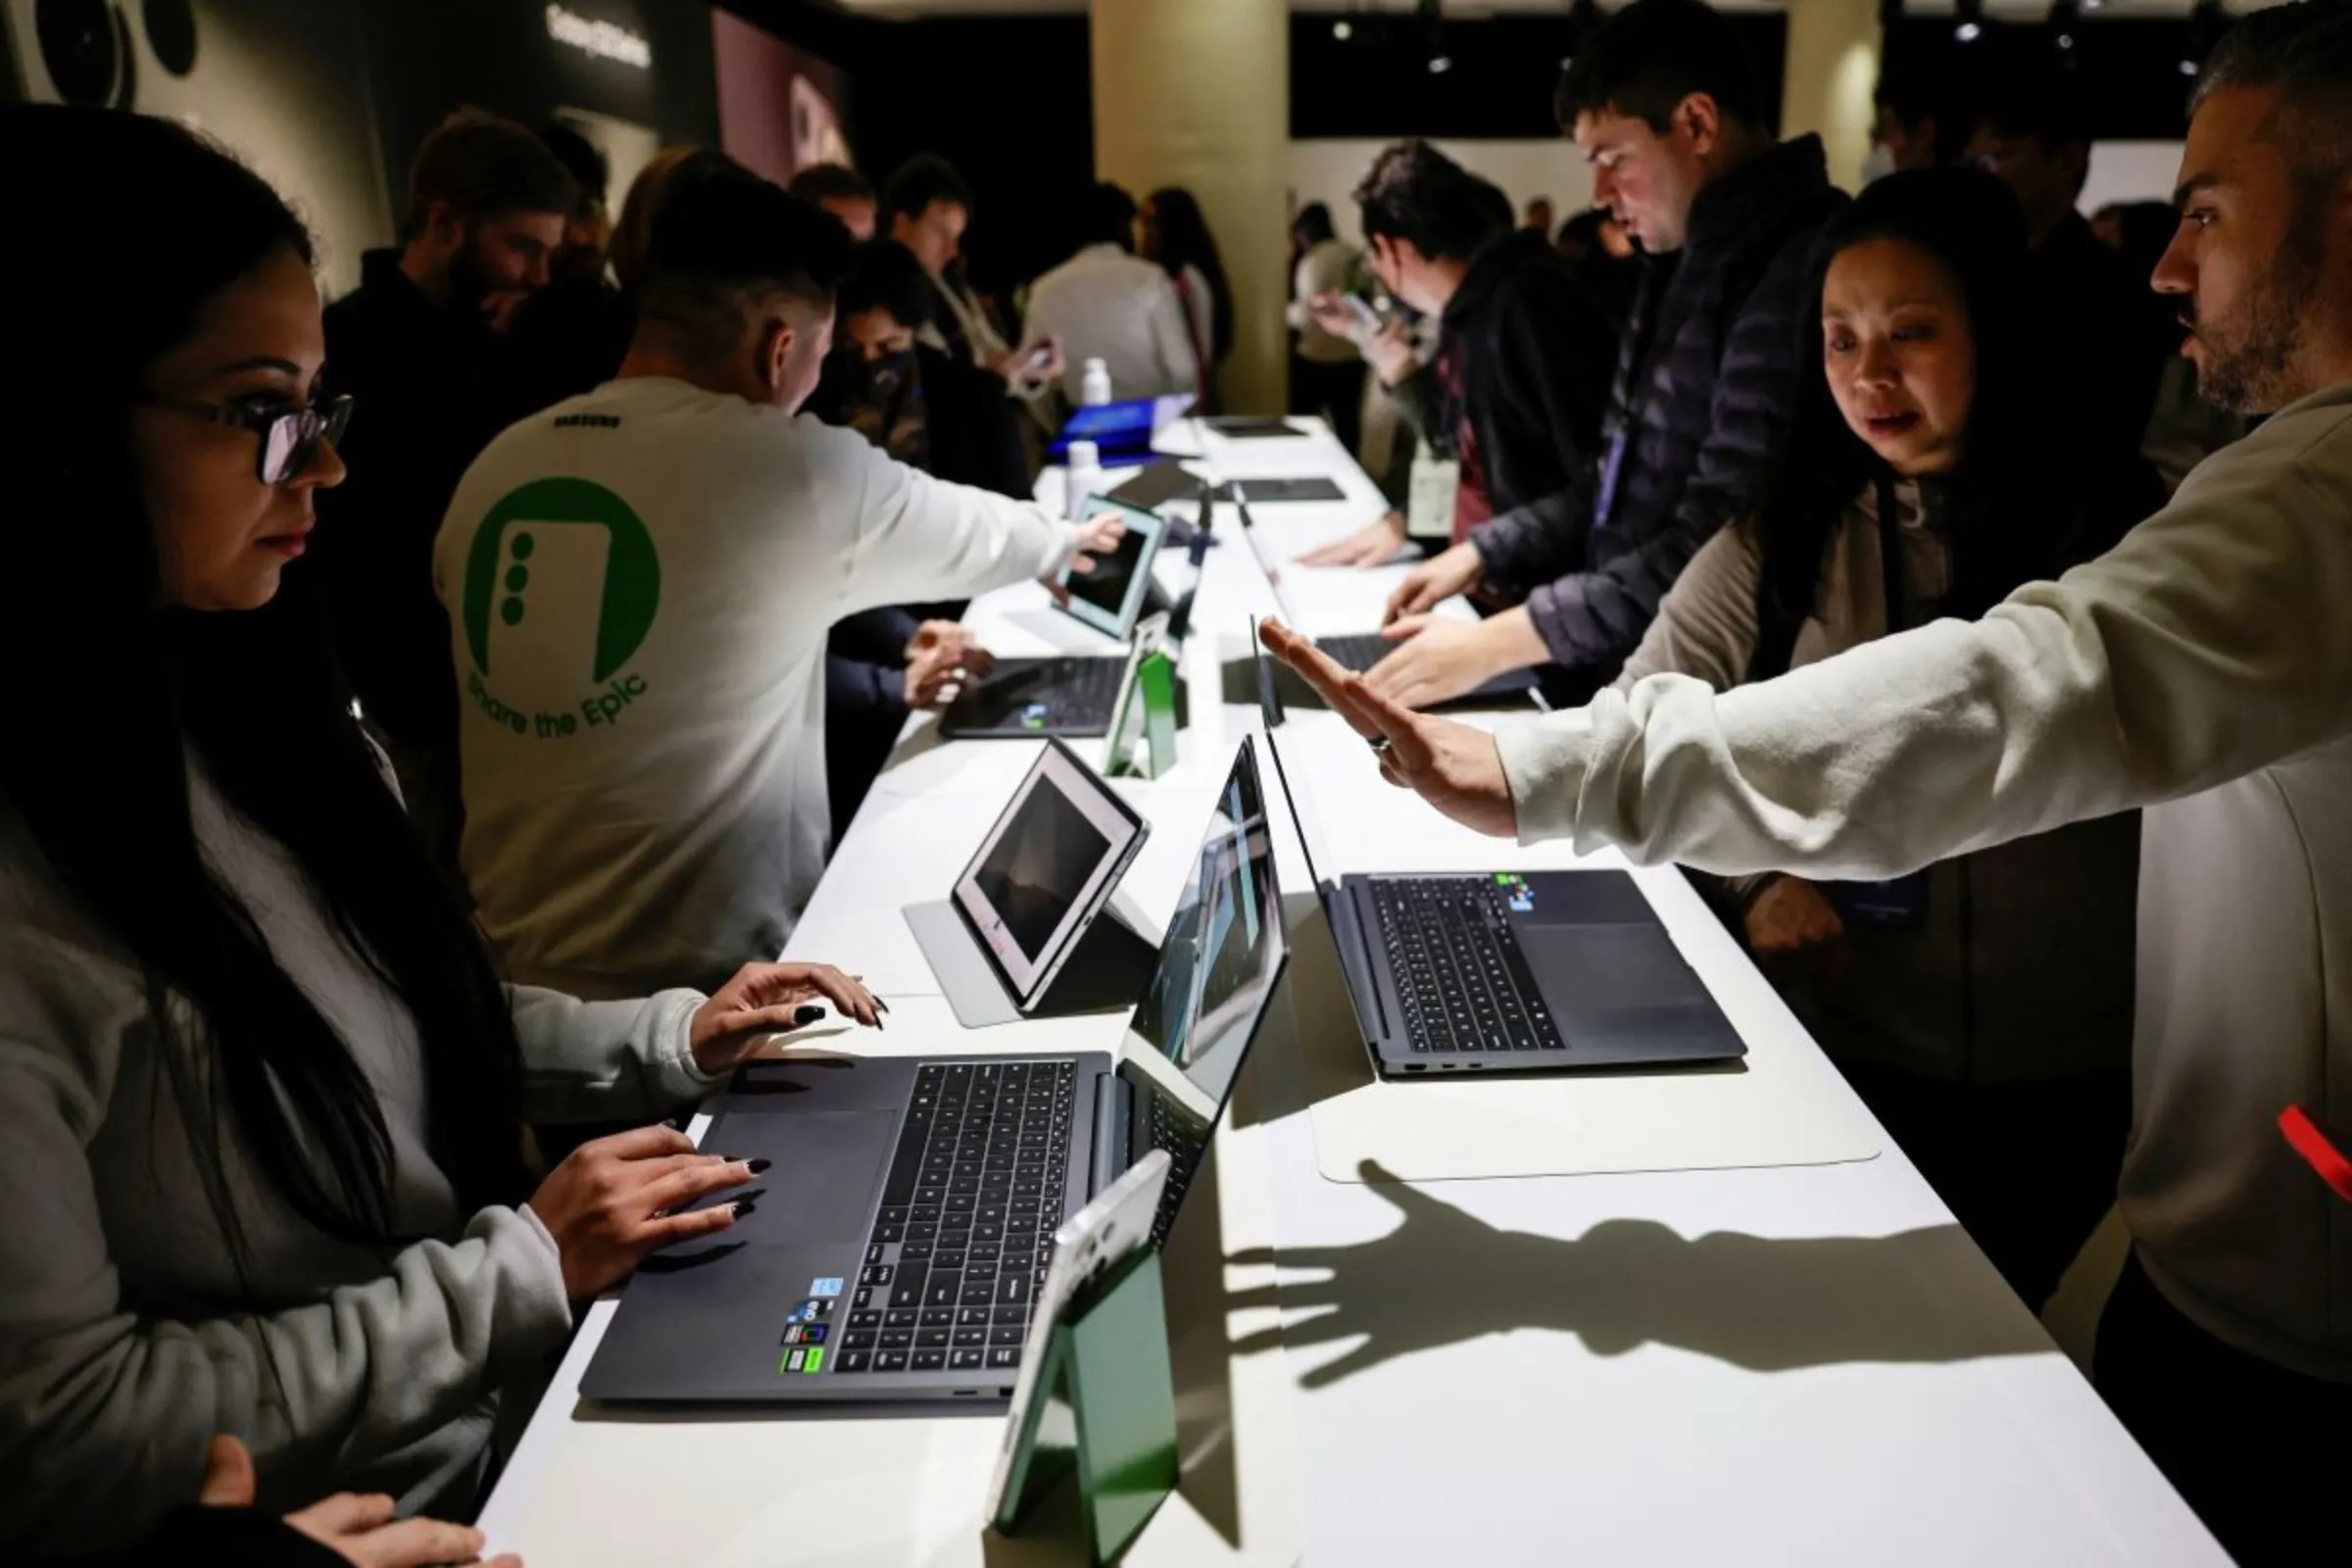 Attendees get their first look at the new Galaxy Book3 series laptops as Samsung Electronics unveils its latest flagship smartphones in San Francisco, California, U.S. February 1, 2023. REUTERS/Peter DaSilva